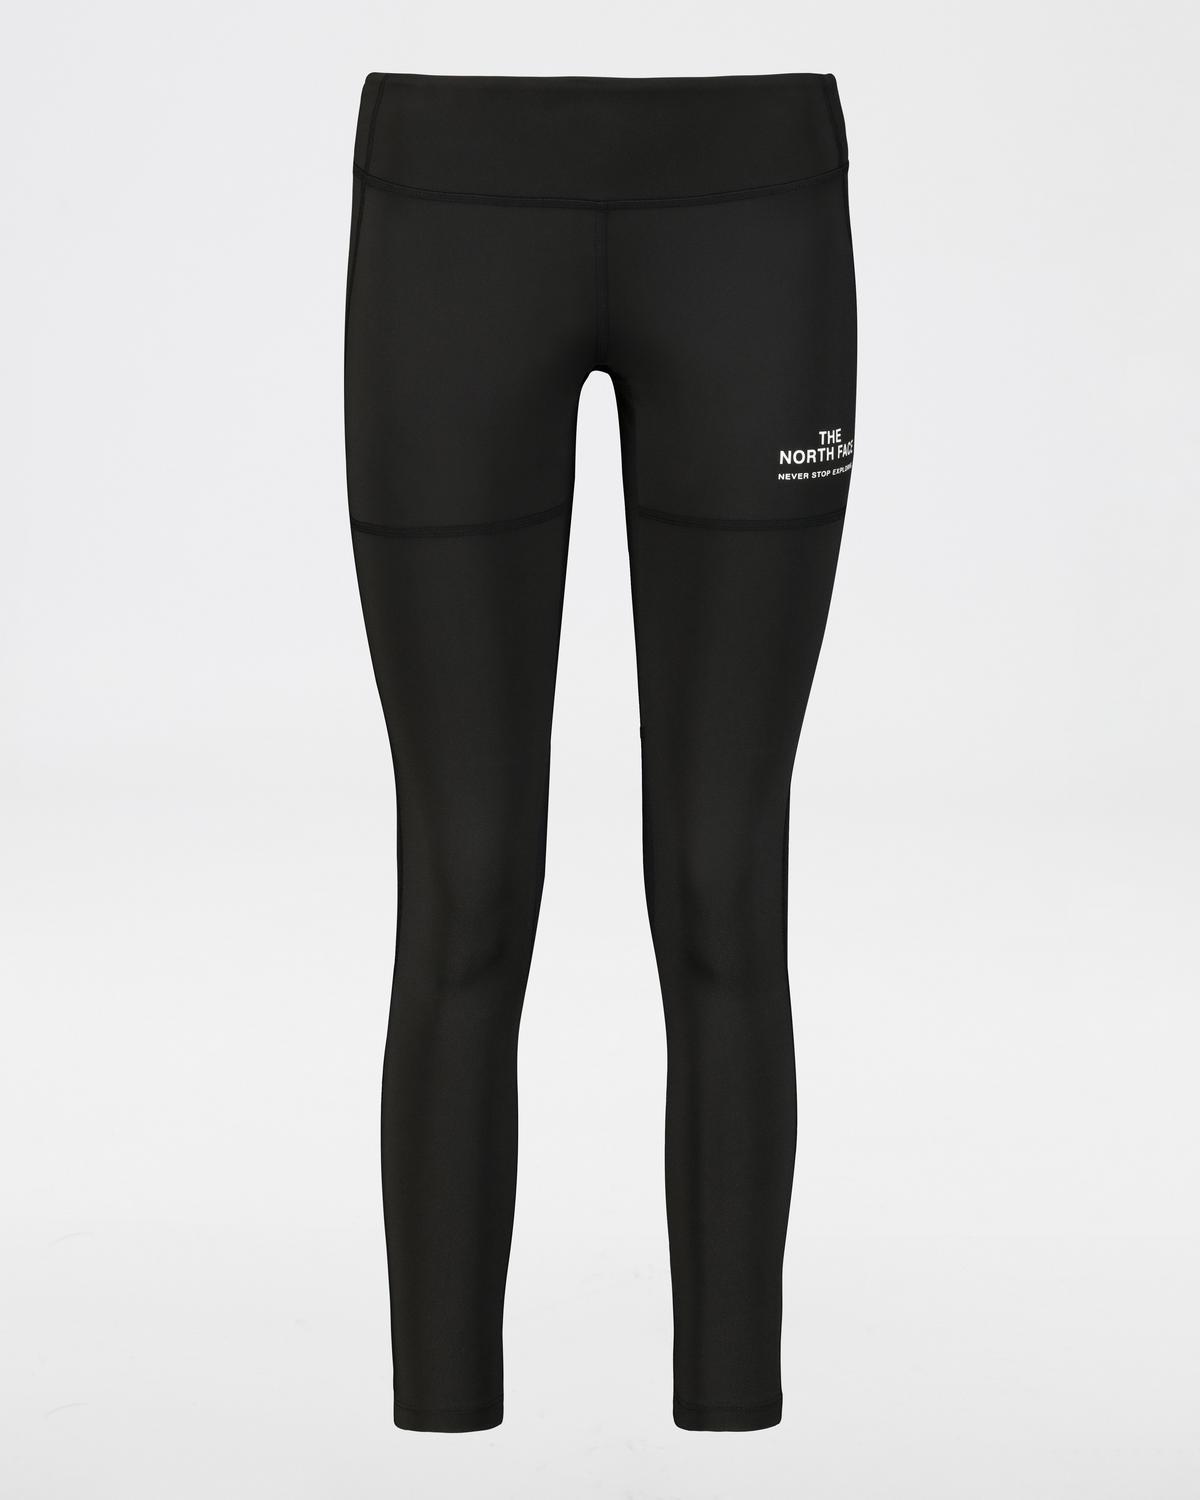 The North Face Women's Mountain Athletic Leggings -  Black